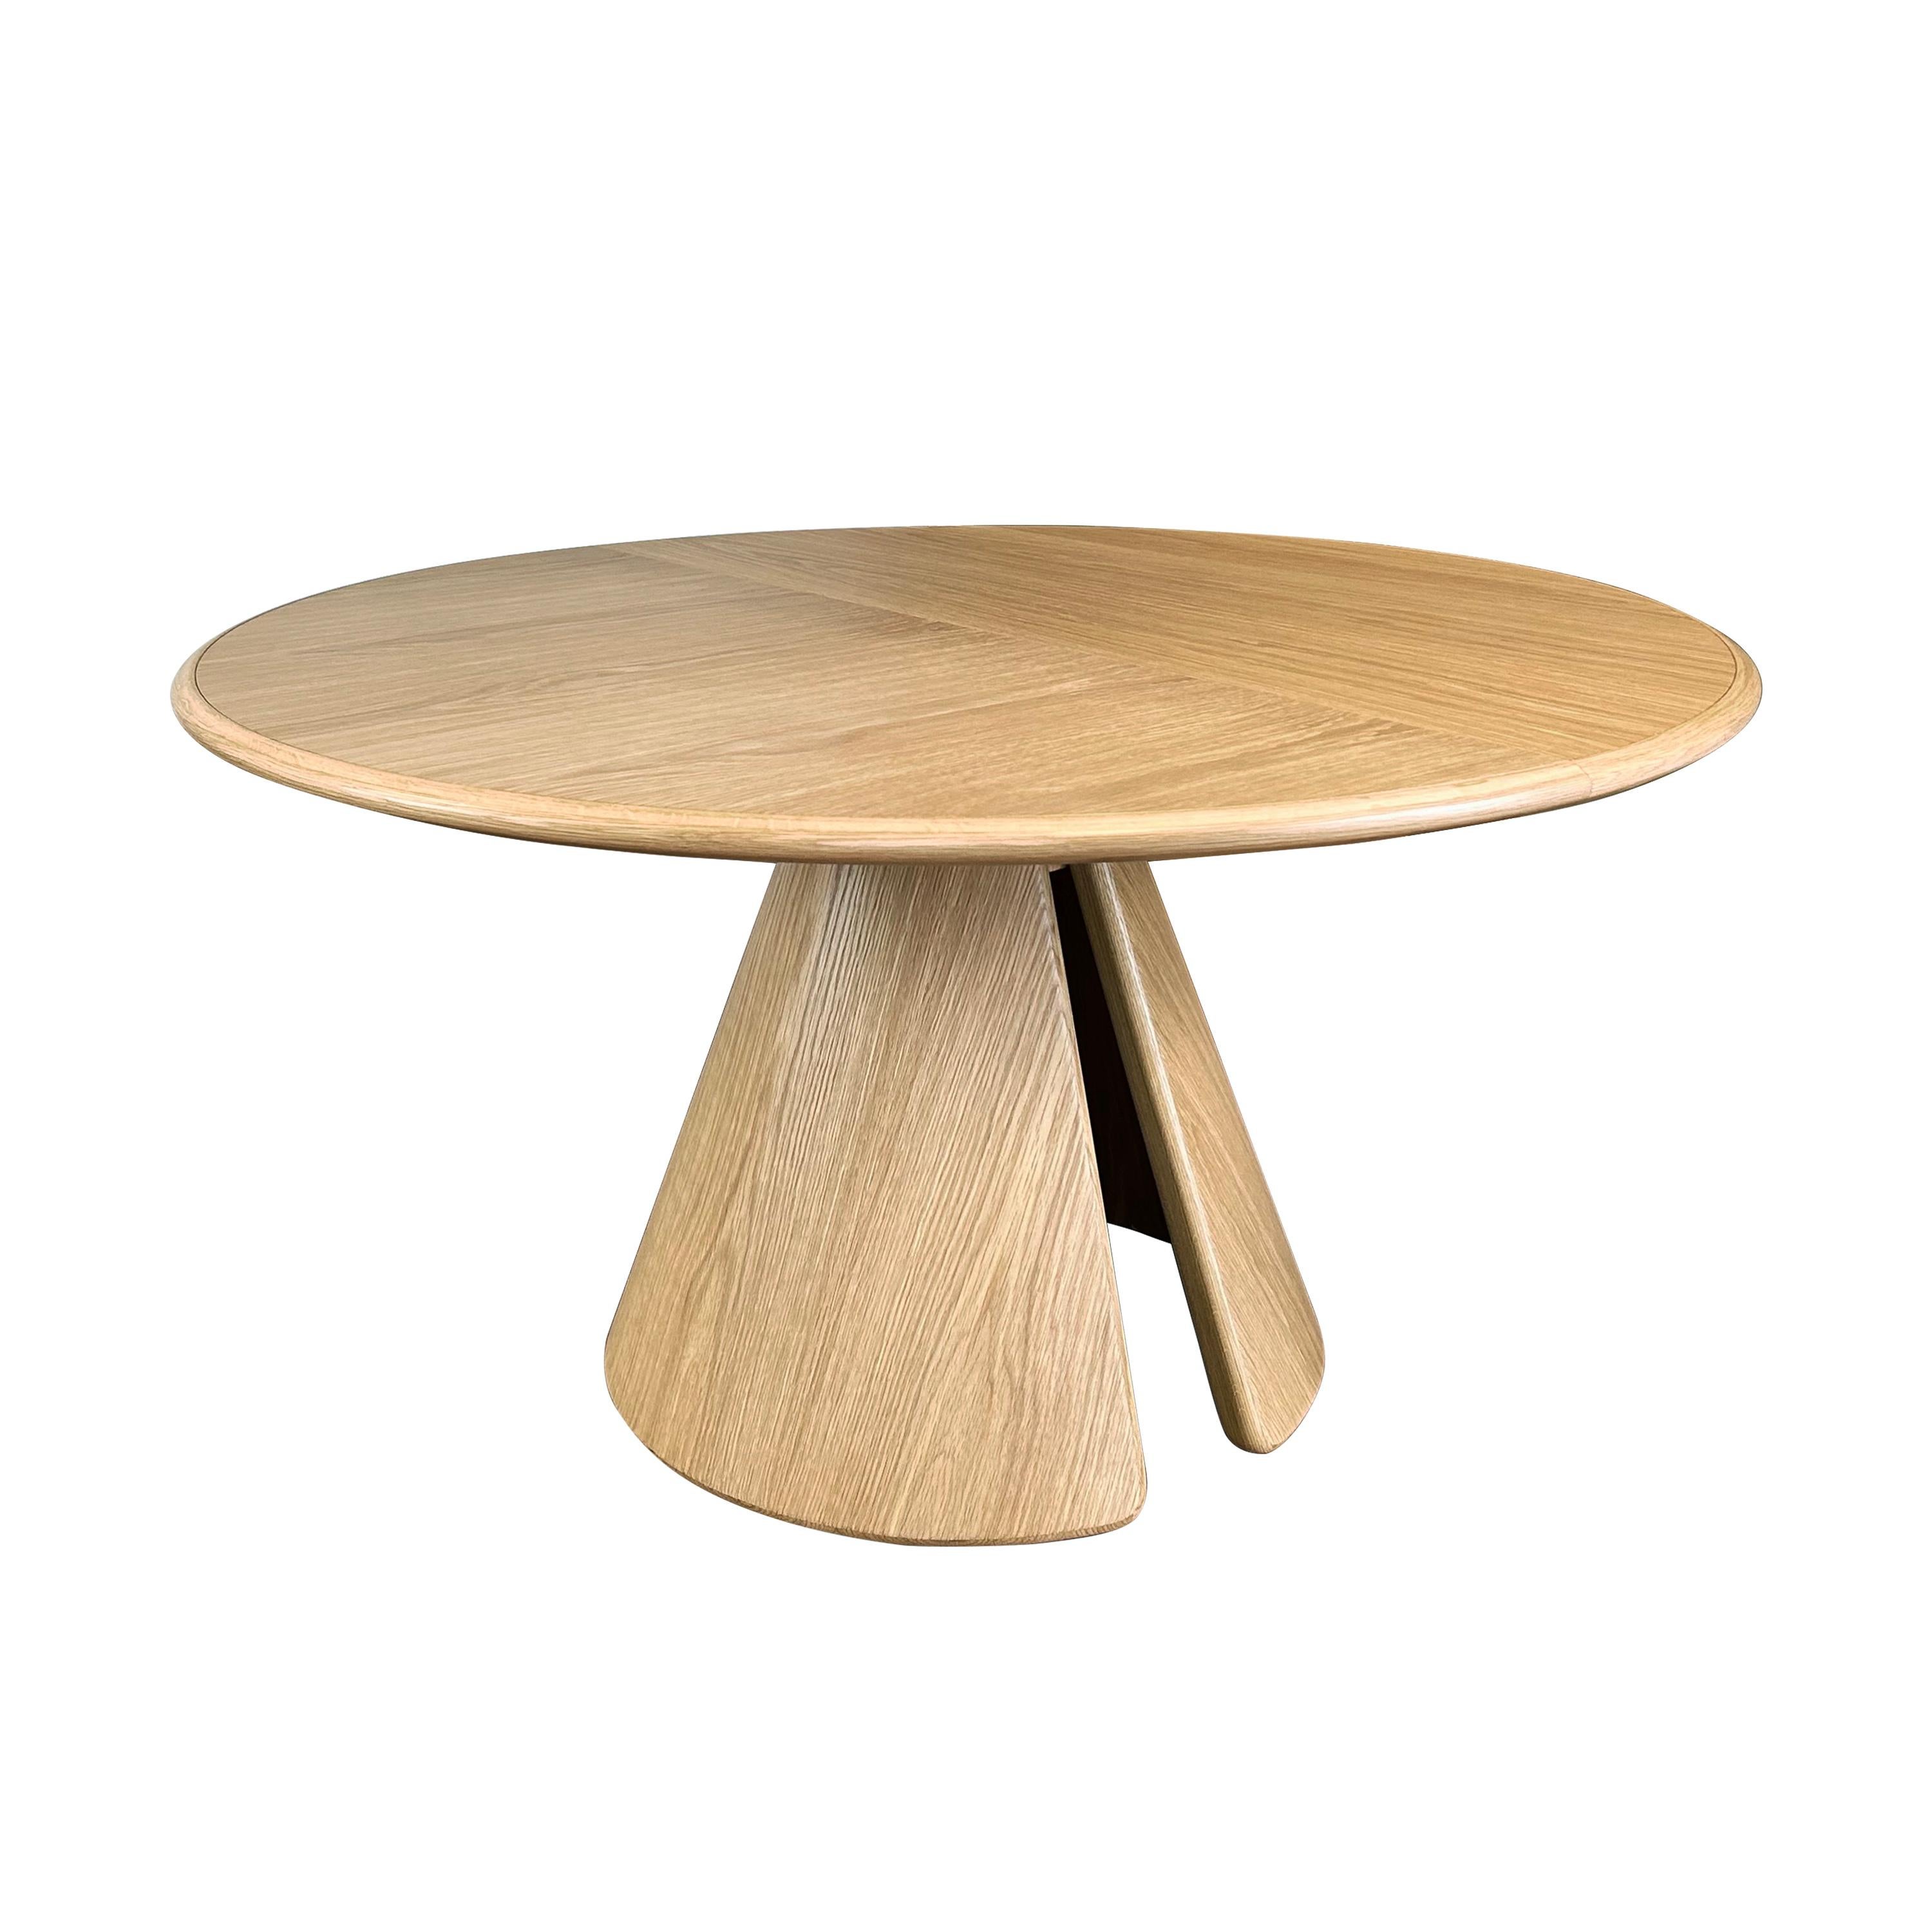 Modern Sama Dining Table, Contemporary Sculptural Round Oak by Fulden Topaloglu For Sale